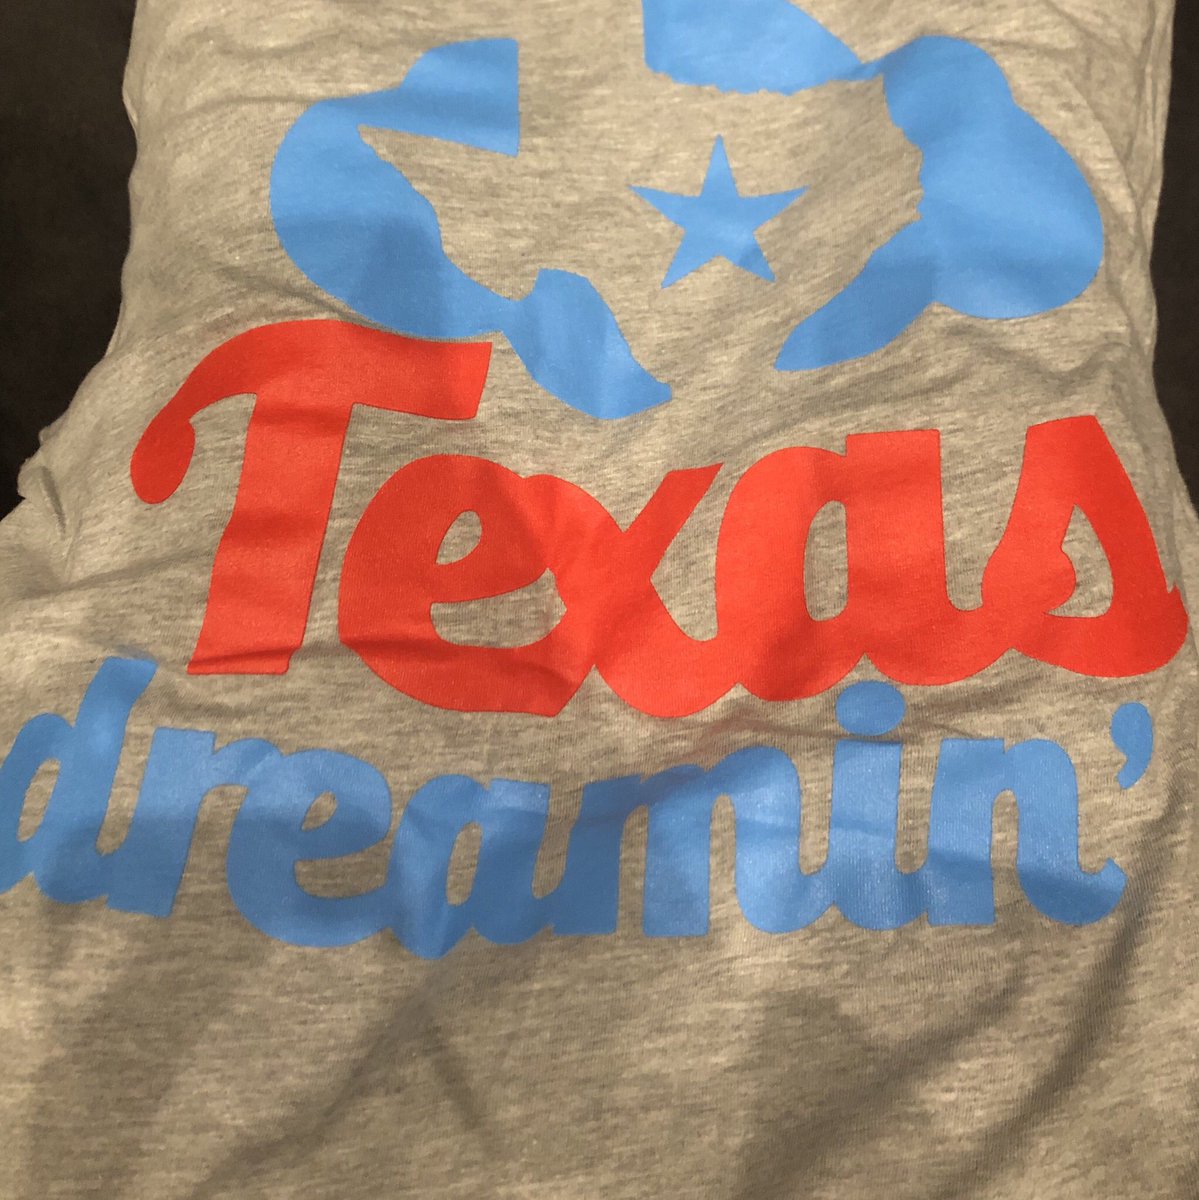 First year at Texas Dreamin’ geeking out on all things #salesforce #texasdreamin #TXD19